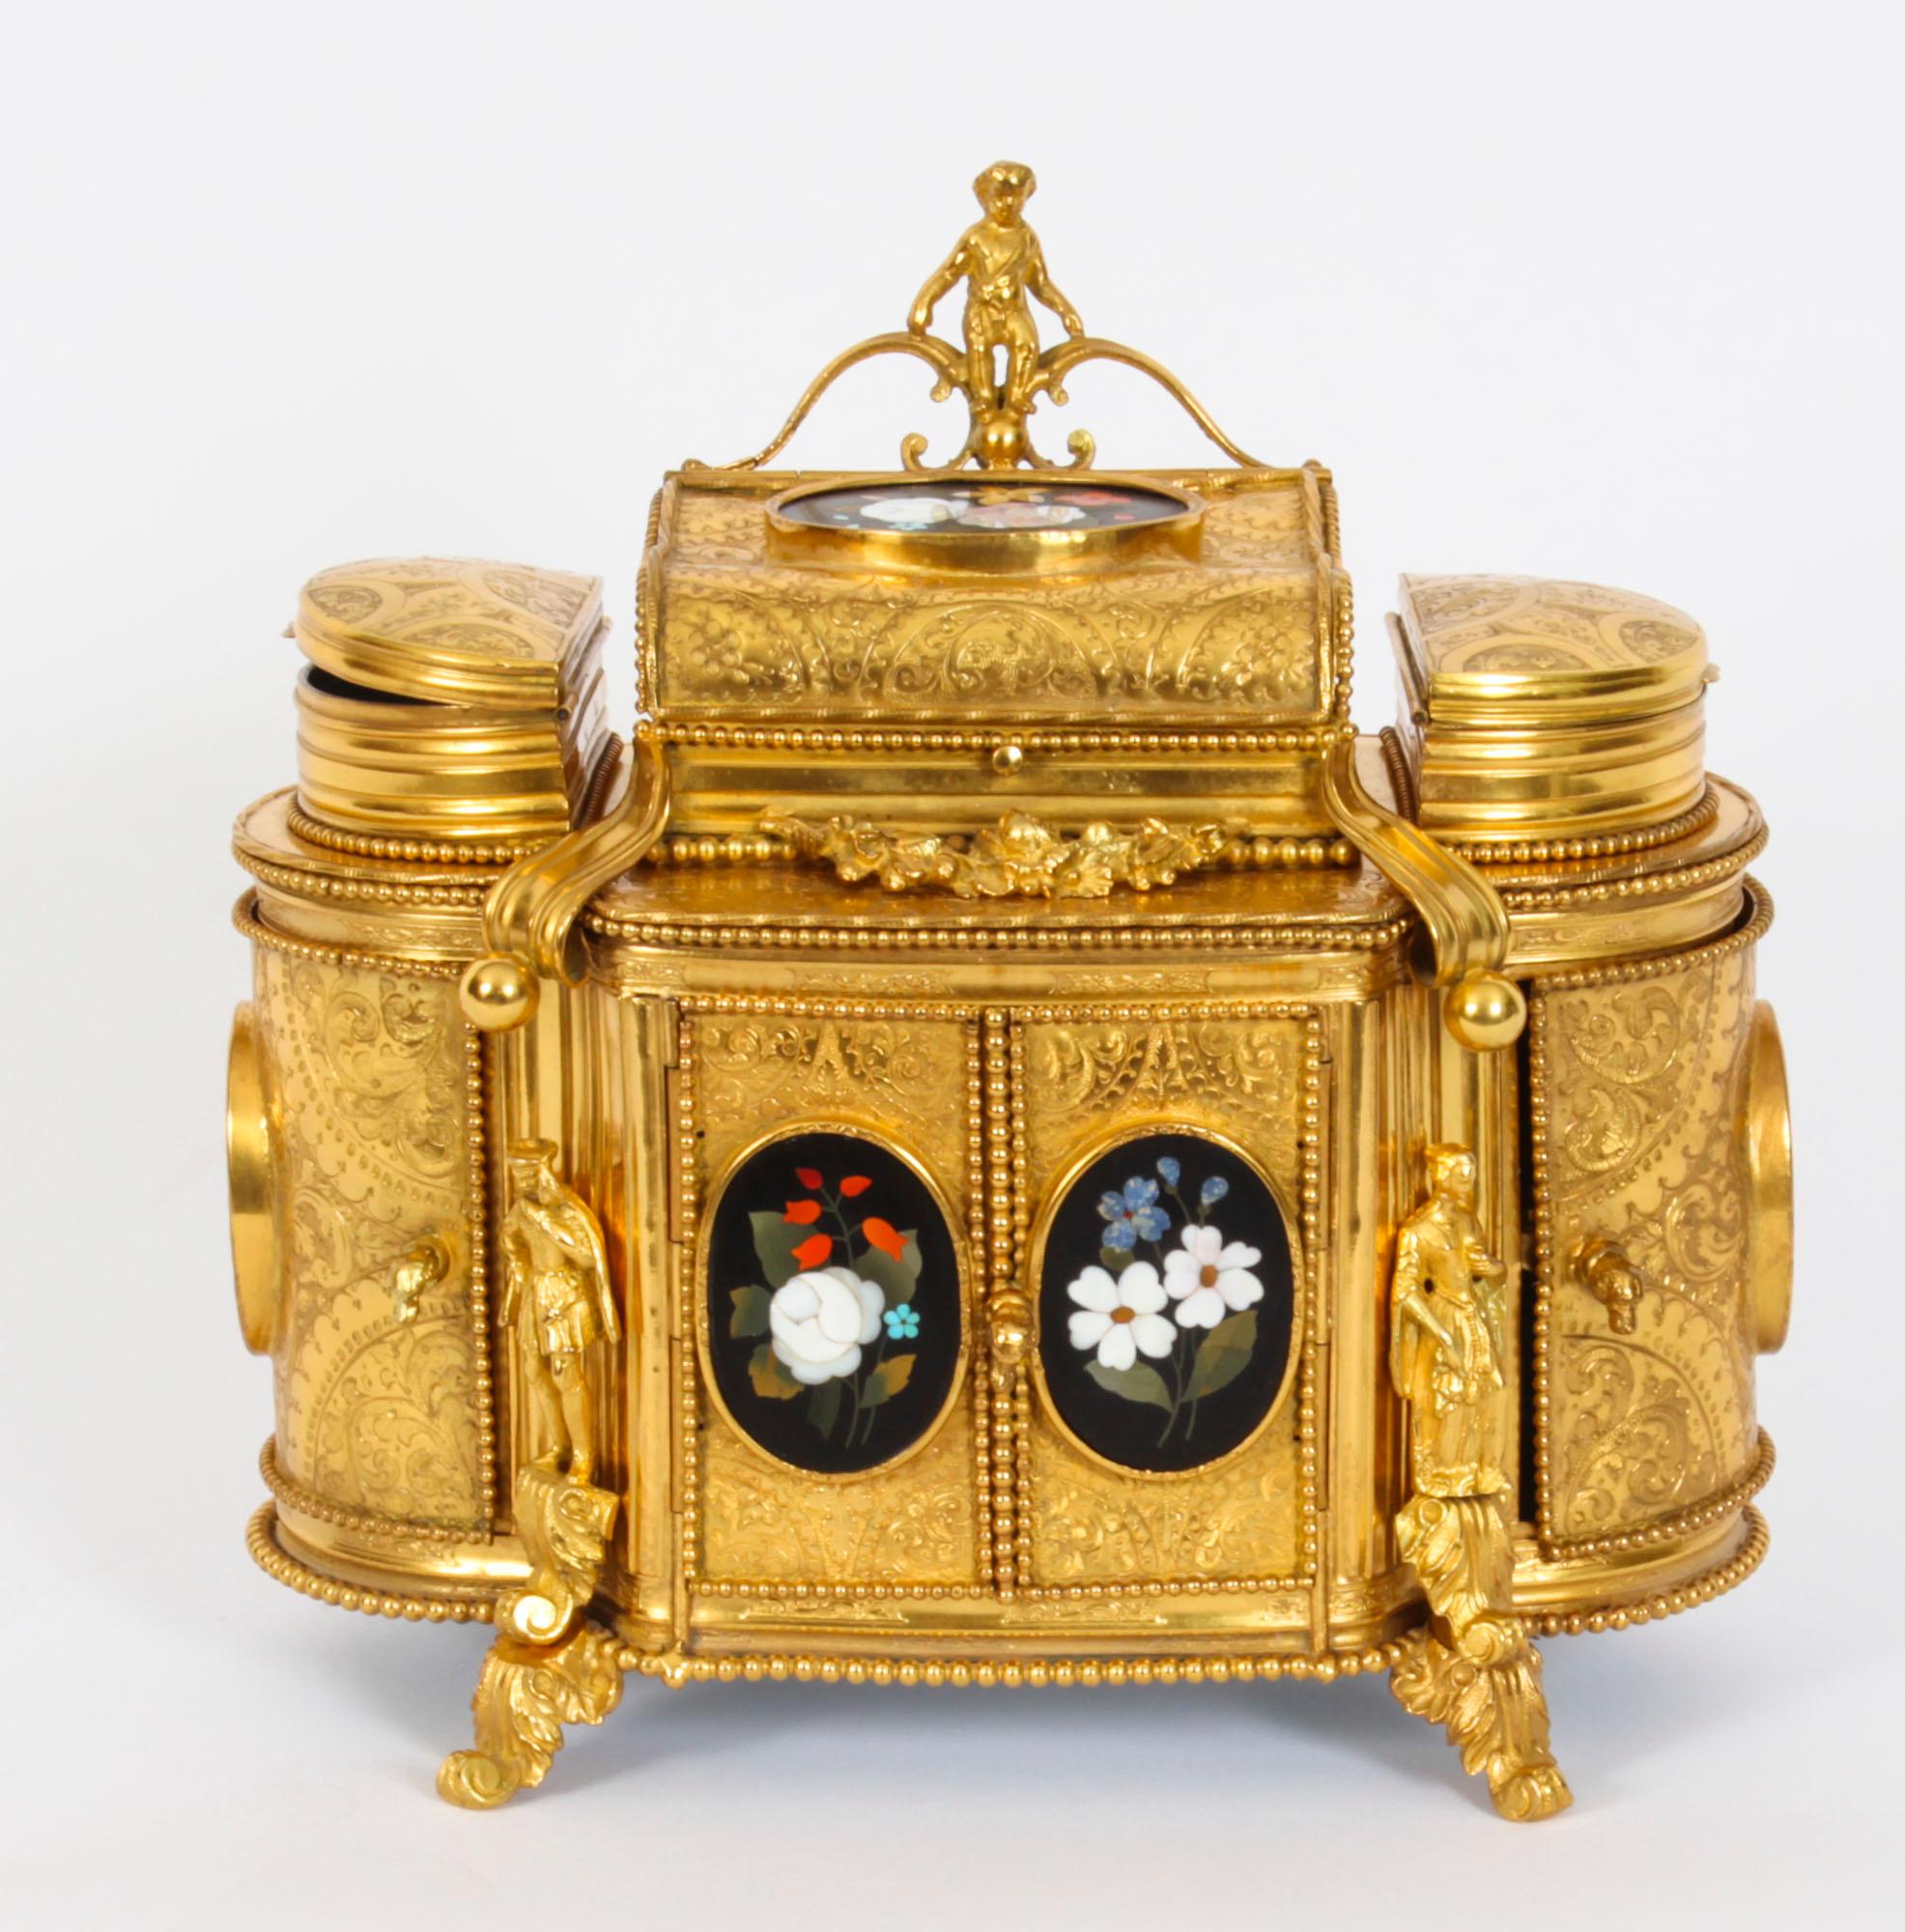 This is an absolutely fabulous antique French engraved ormolu and Pietra Dura mounted jewellery cabinet, Circa 1860 in date.

The casket is in the form of a cabinet, with three fitted jewellery compartments on the top,  the central compartment  is